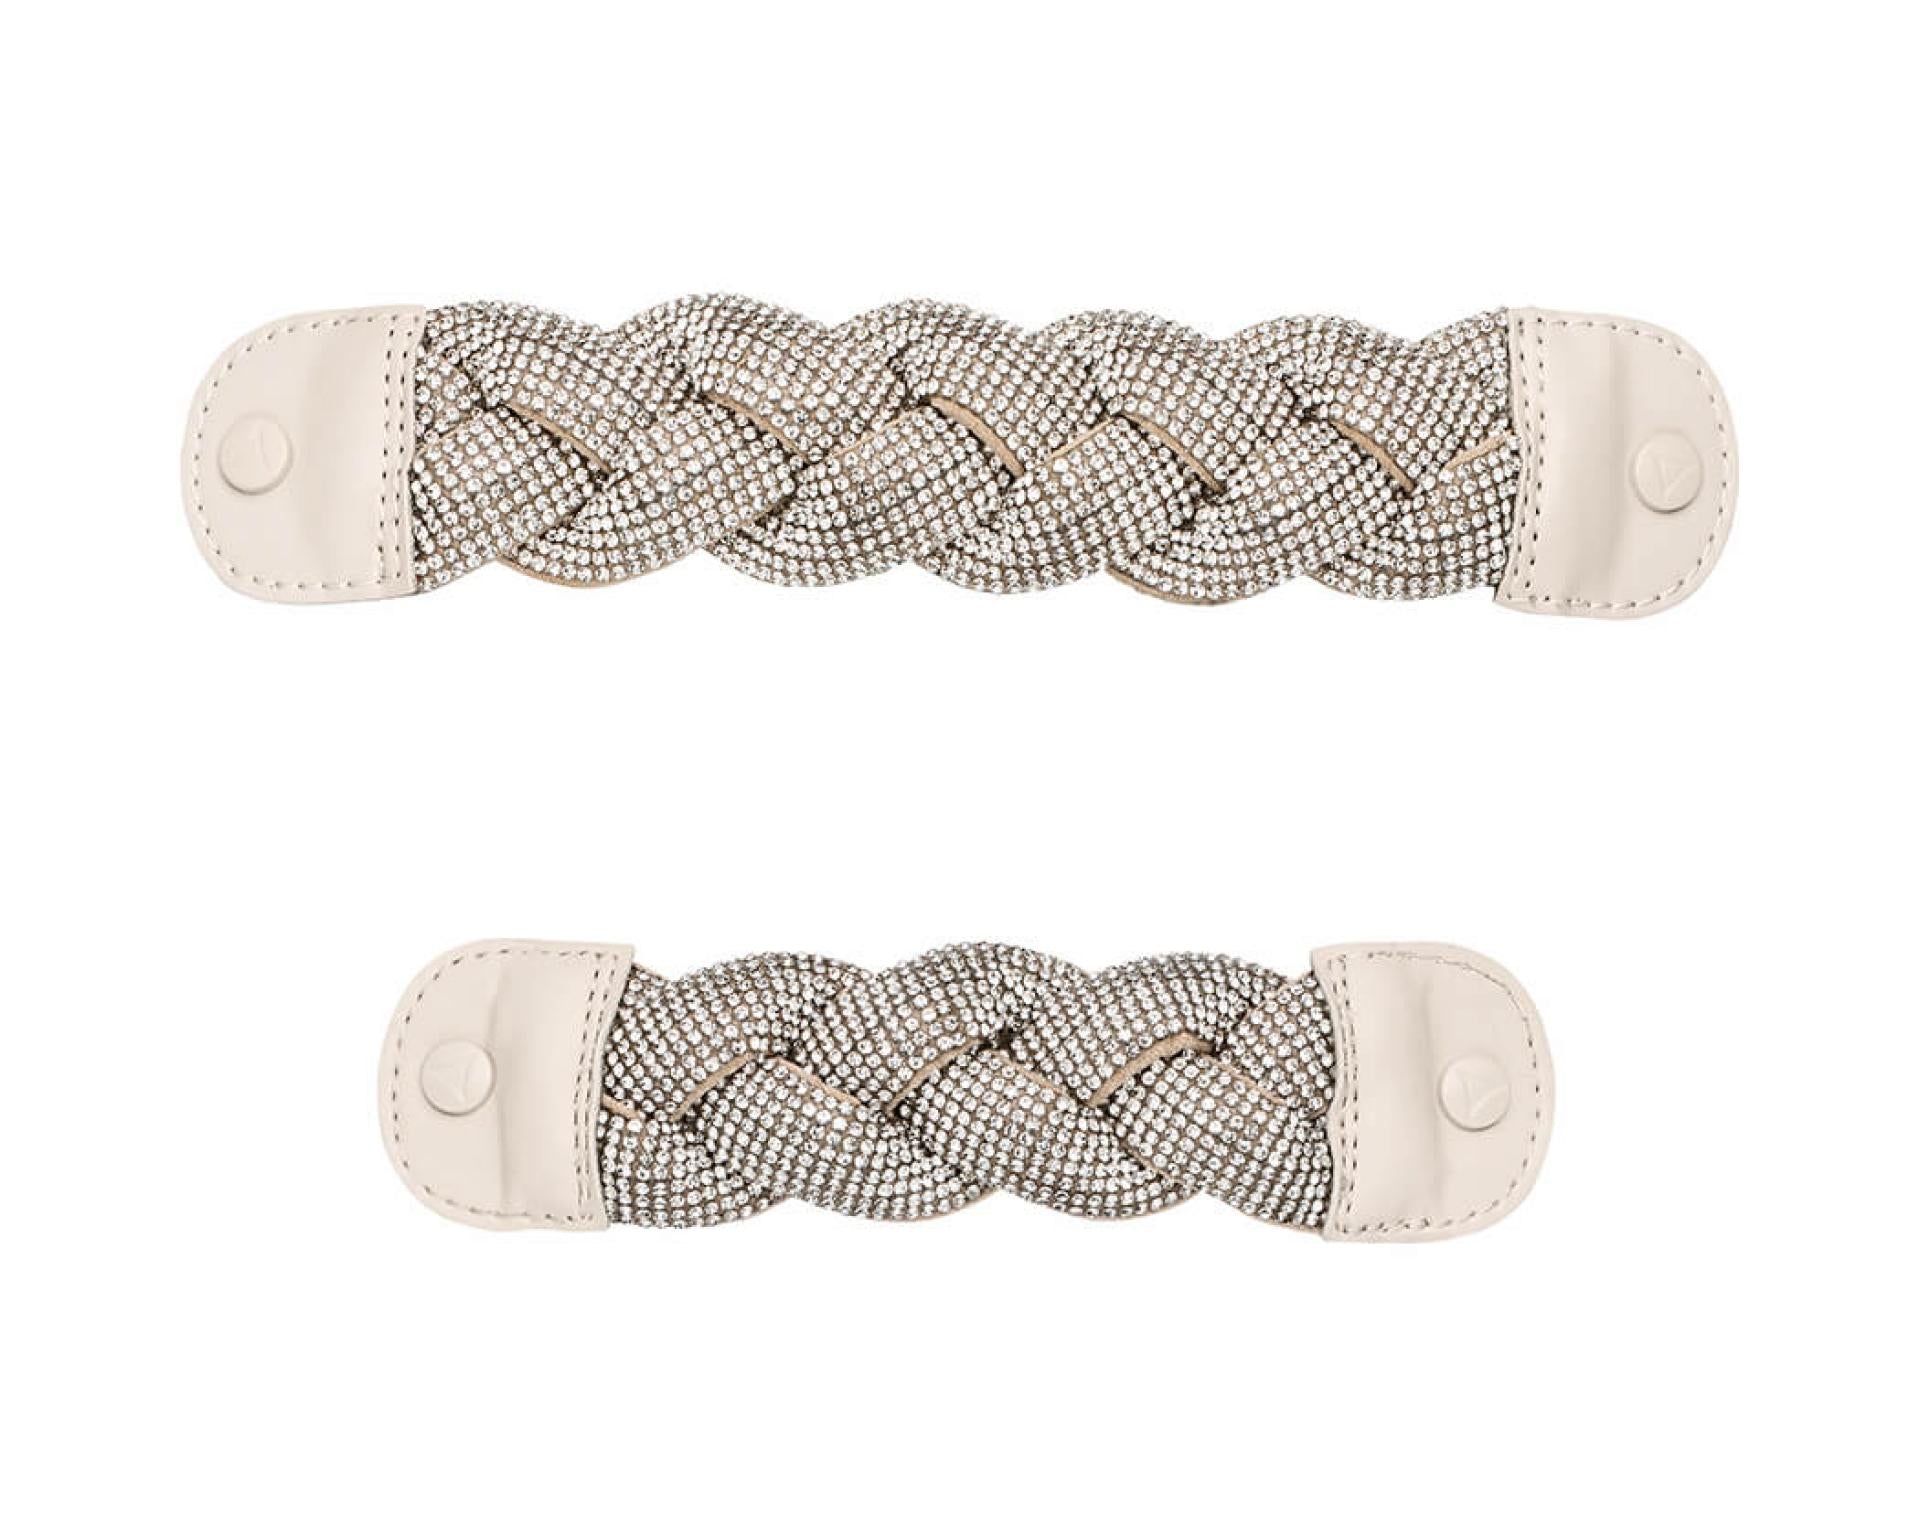 Hey Marly Accessoire für Double Patch Sandale PS2 - Variante: Braided Glitter - Crema